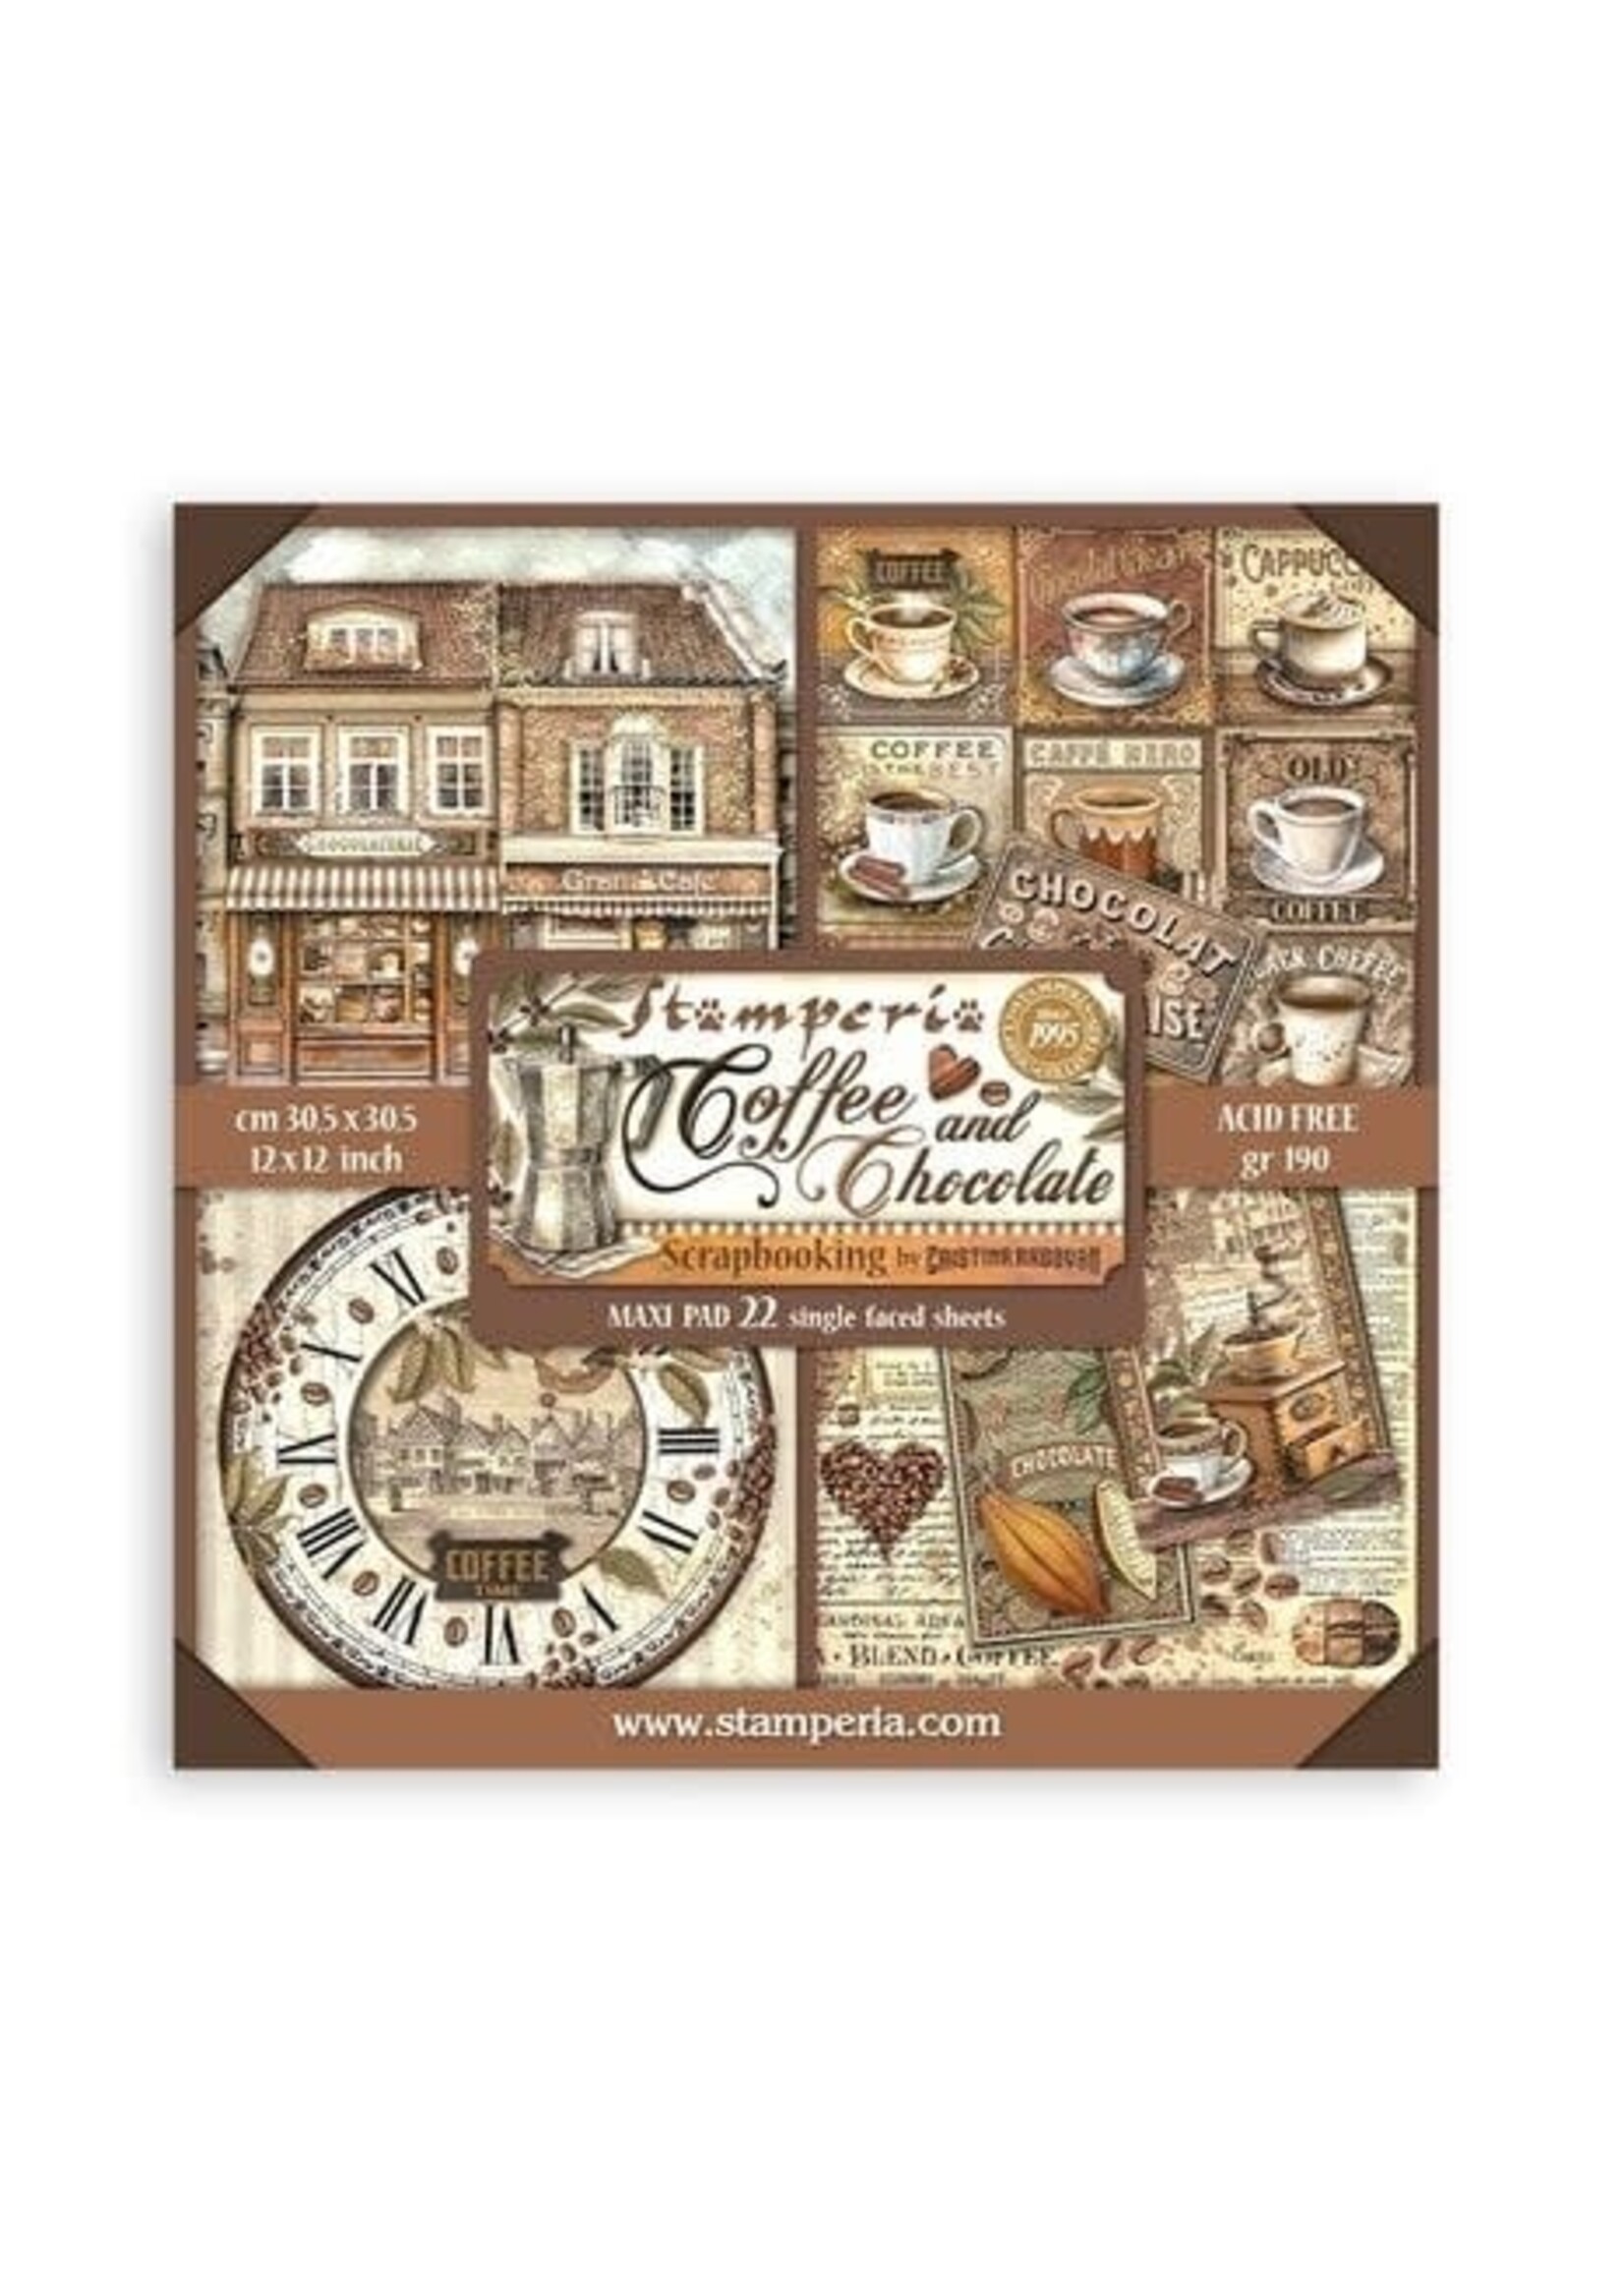 Stamperia Coffee and Chocolate Maxi 12x12 Inch Paper Pack (Single Face) (SBBXLB13)